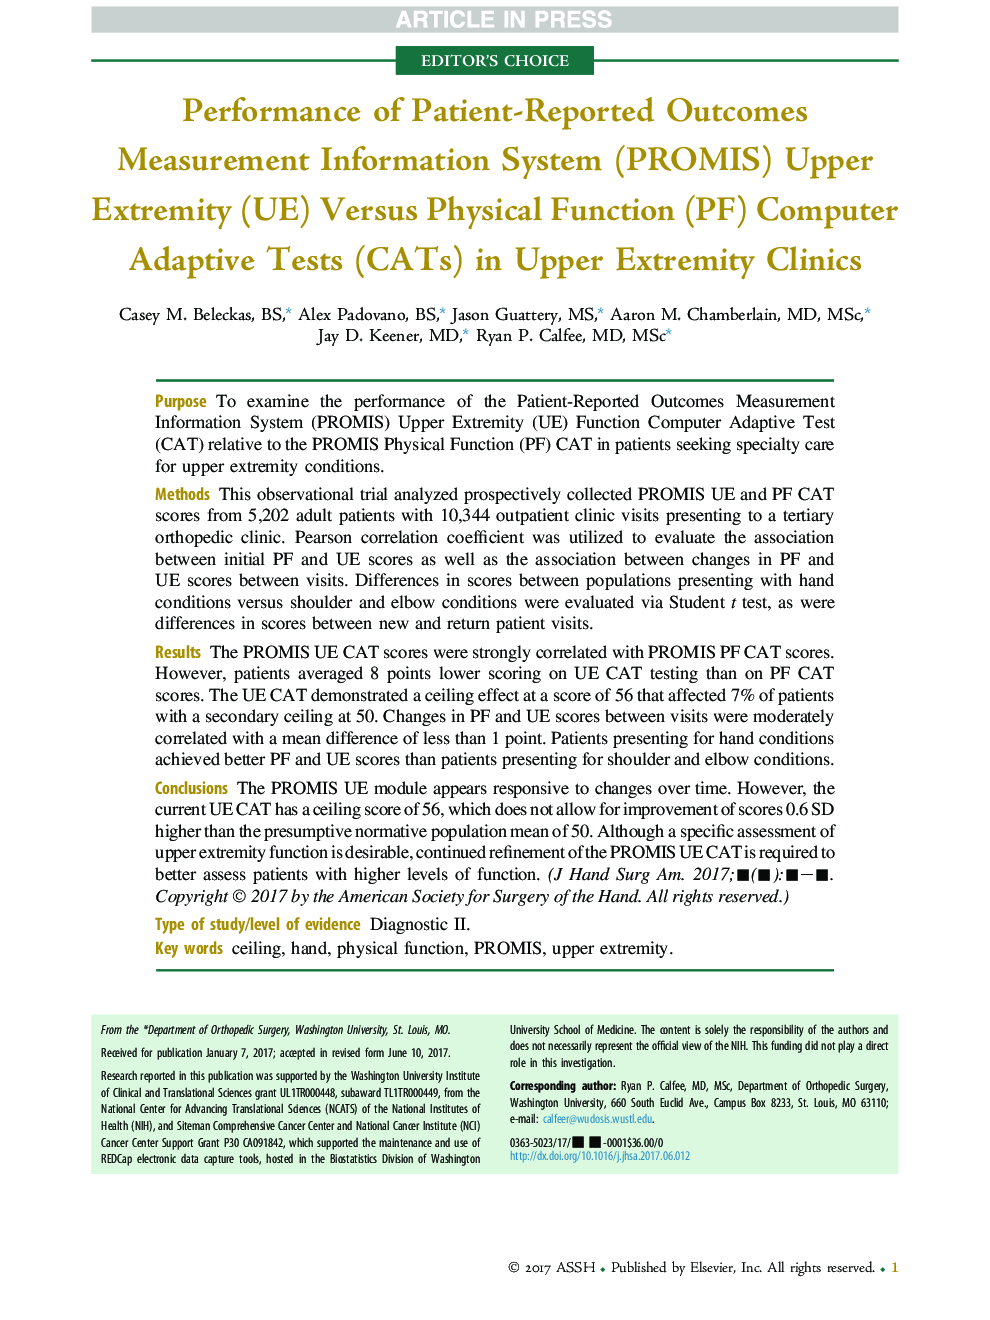 Performance of Patient-Reported Outcomes Measurement Information System (PROMIS) Upper Extremity (UE) Versus Physical Function (PF) Computer Adaptive Tests (CATs) in Upper Extremity Clinics